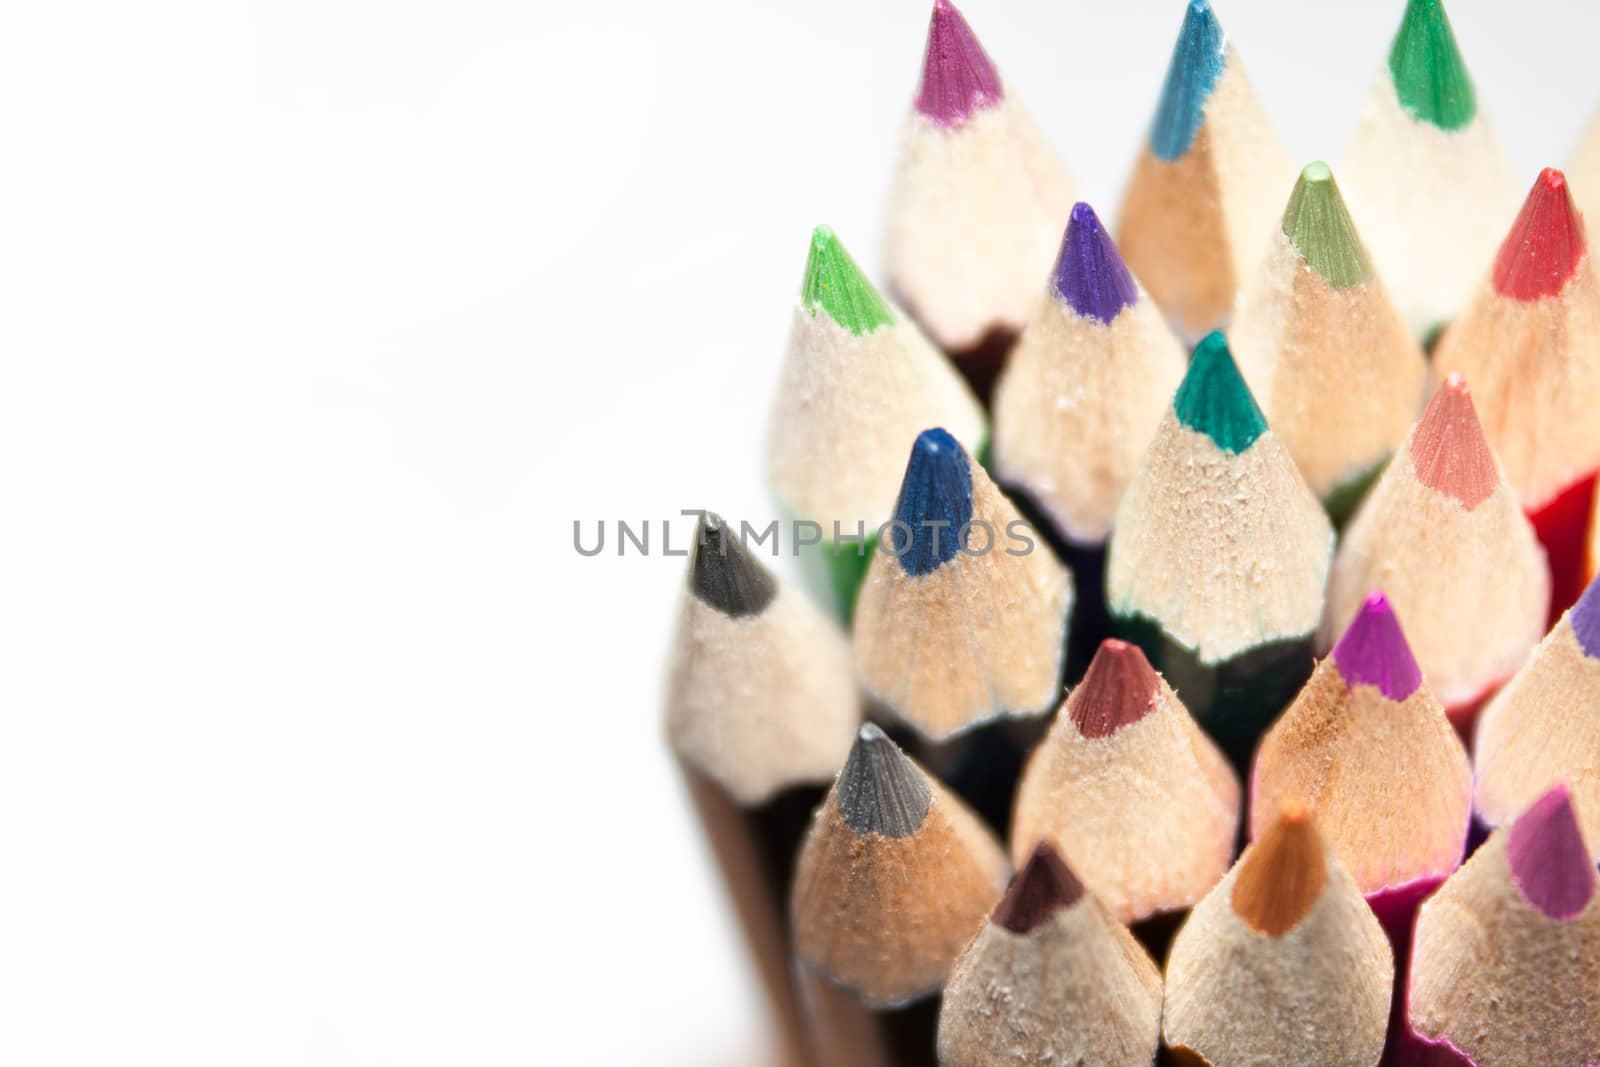 Wooden pencils in a pile on the white background.